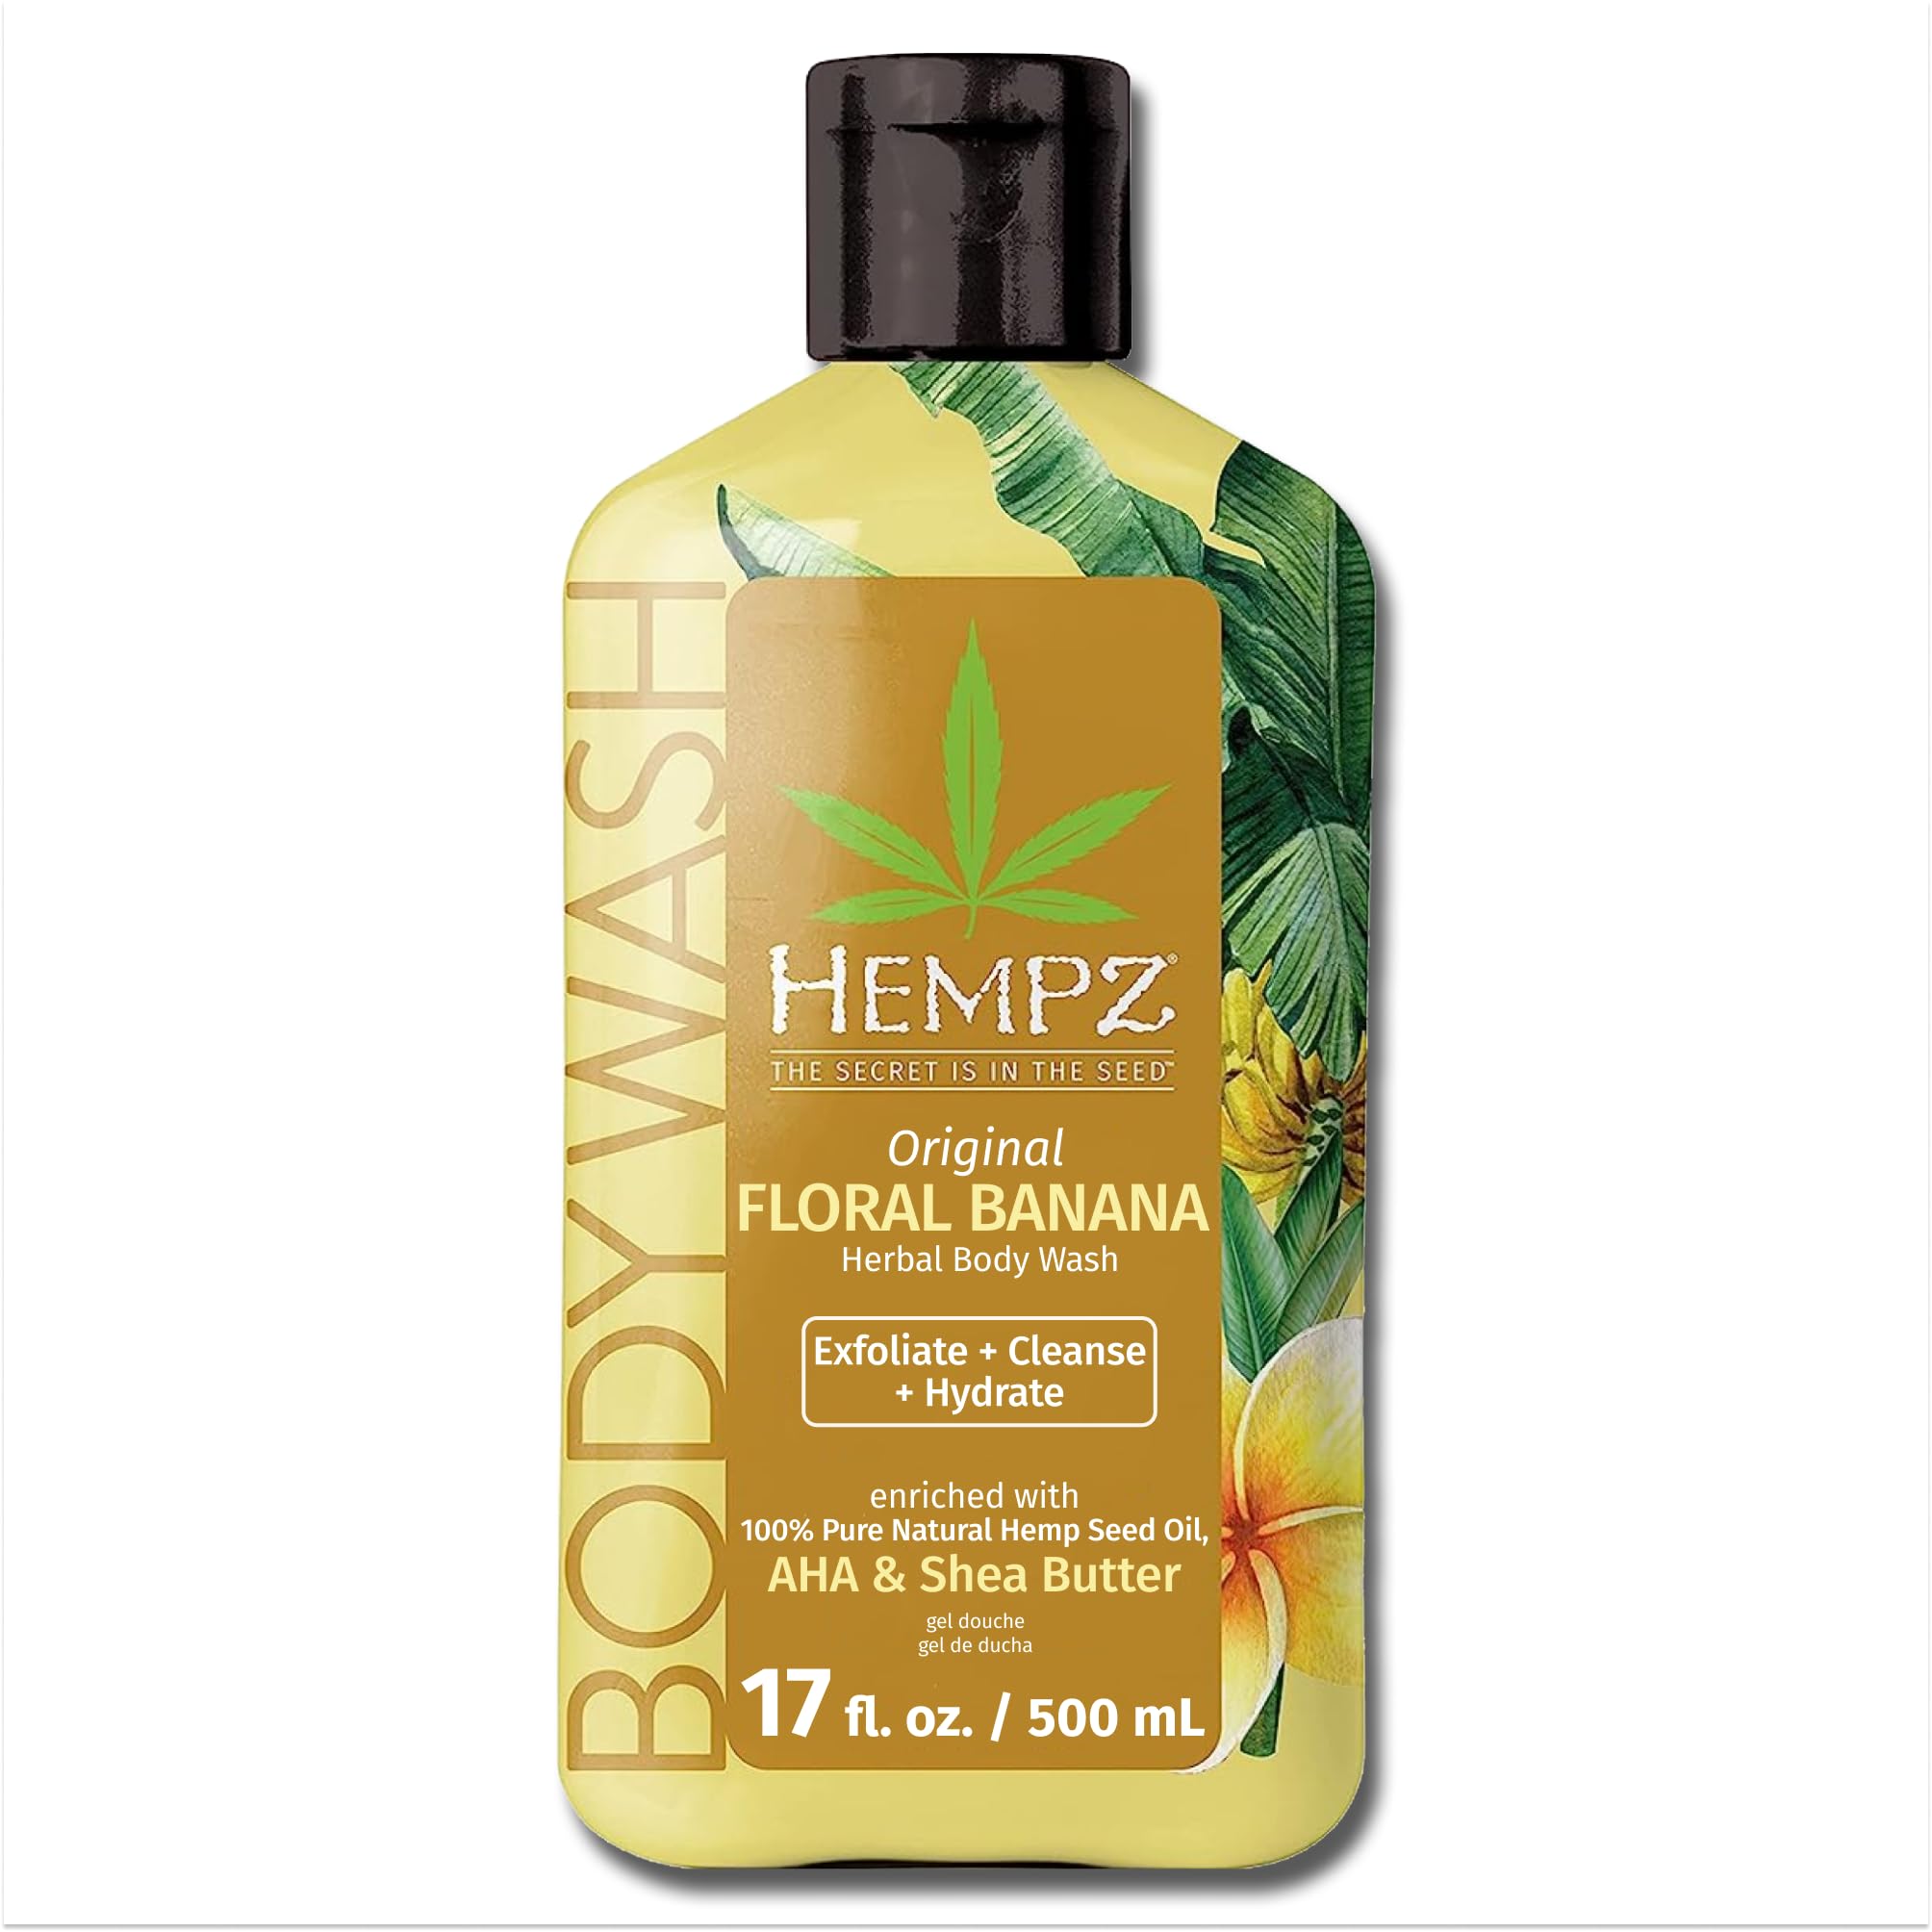 Hempz Body Wash - Original Floral & Banana - Hydrating for Sensitive Skin, Scented, Exfoliating with Shea Butter, Pure Hemp Seed Oil, and Algae for Sensitive Skin - 17 fl oz